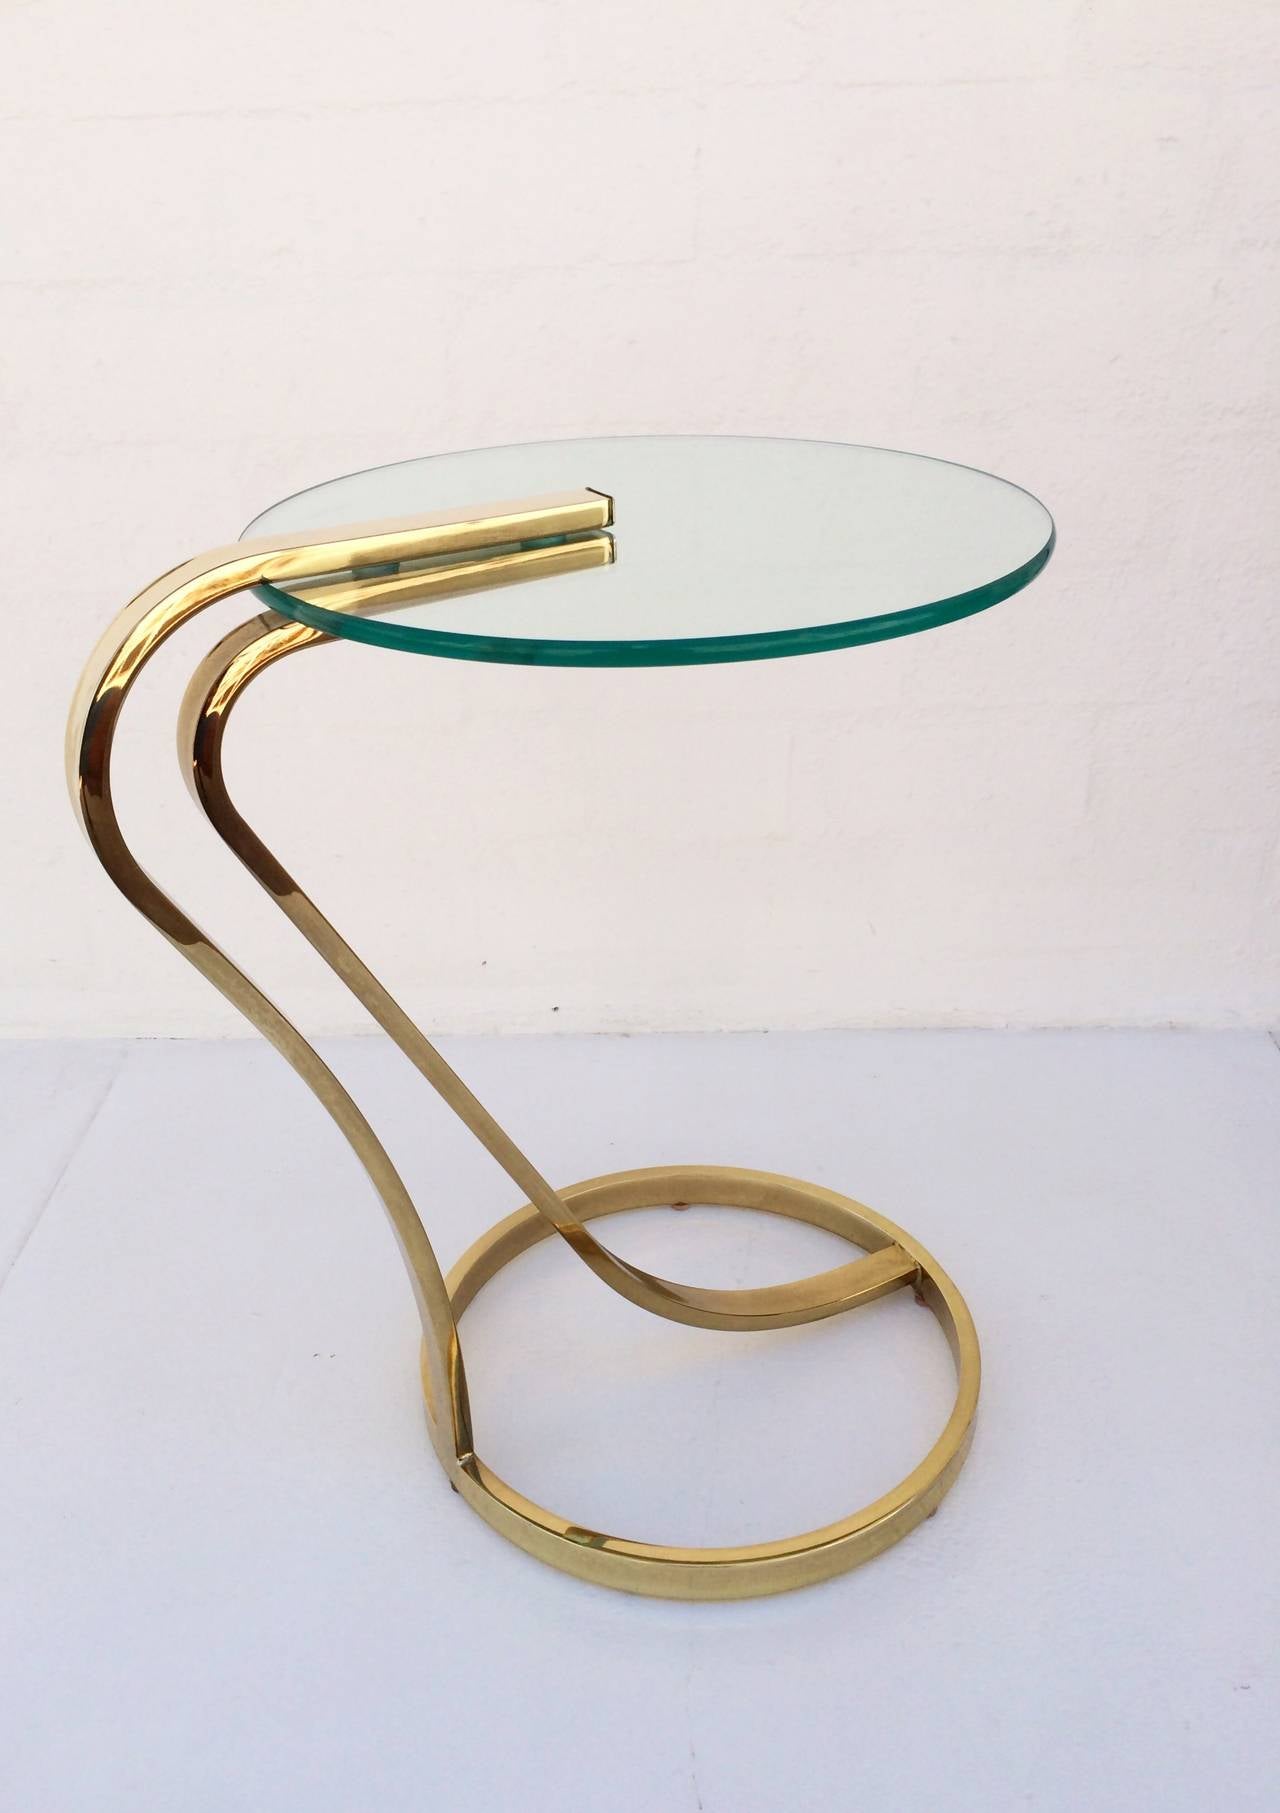 A polished brass and glass occasional table by Milo Baughman for Design Institute of America.  The glass top is 3/8